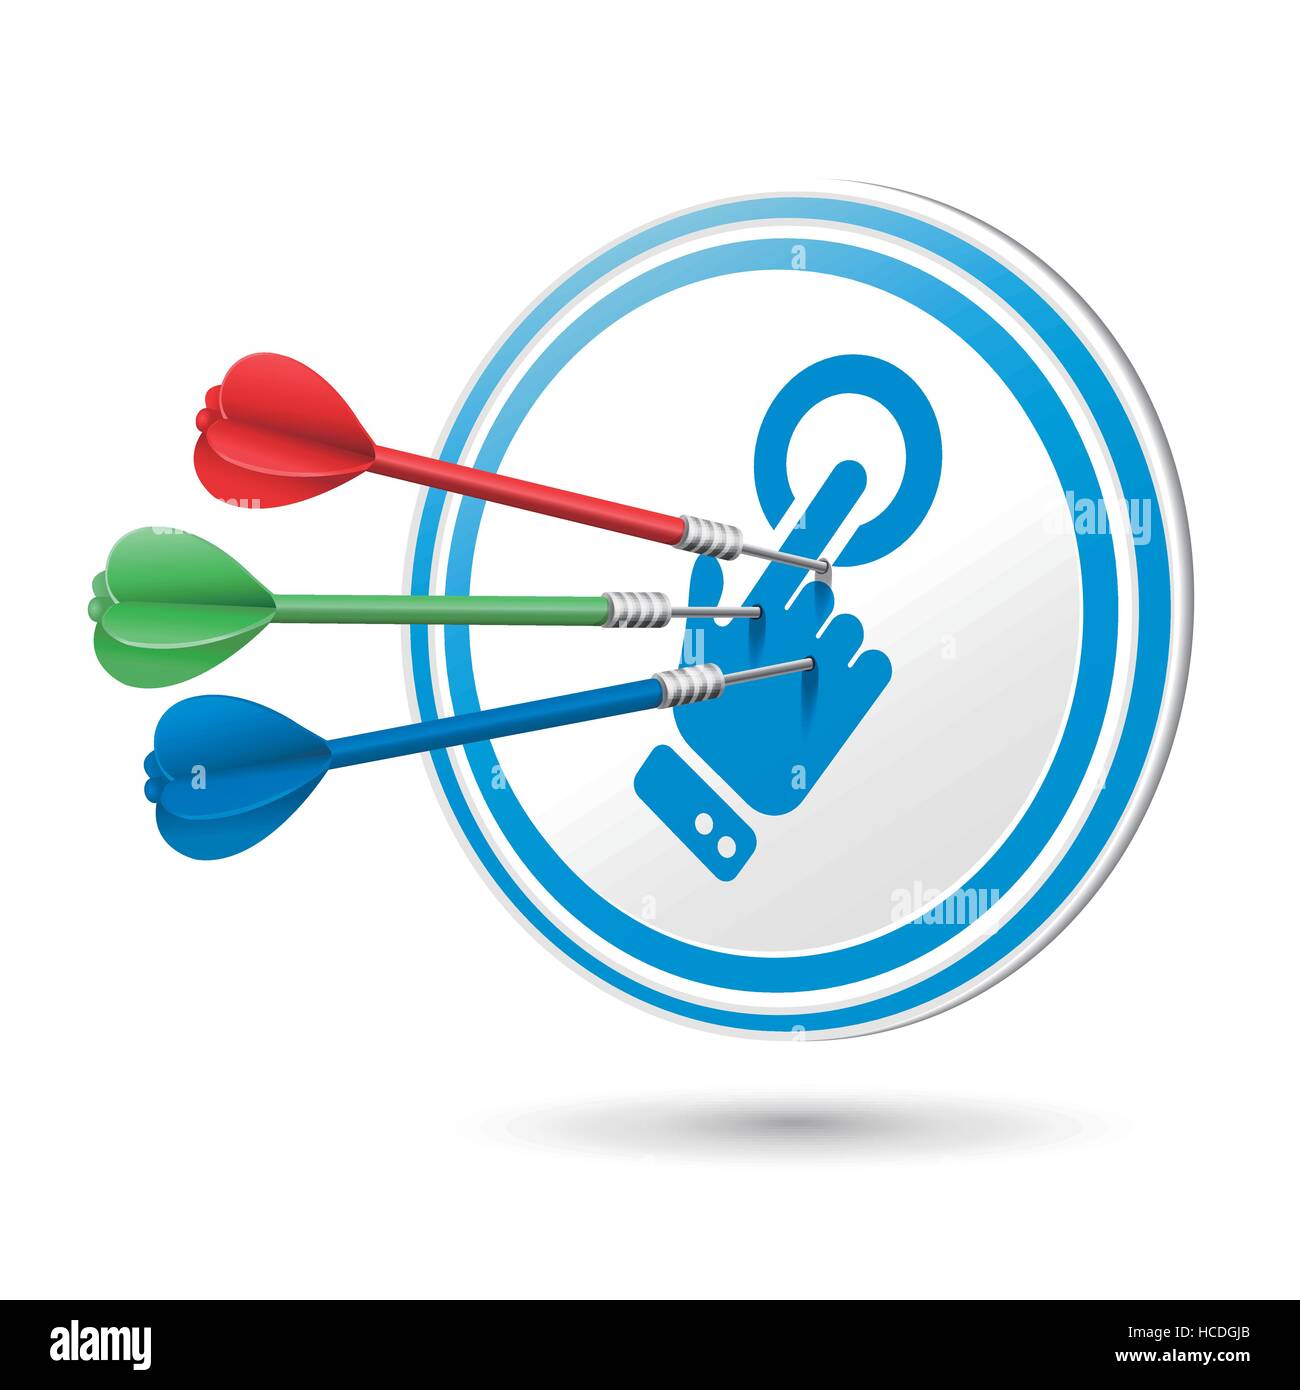 touch concept target with darts hitting on it over white Stock Vector